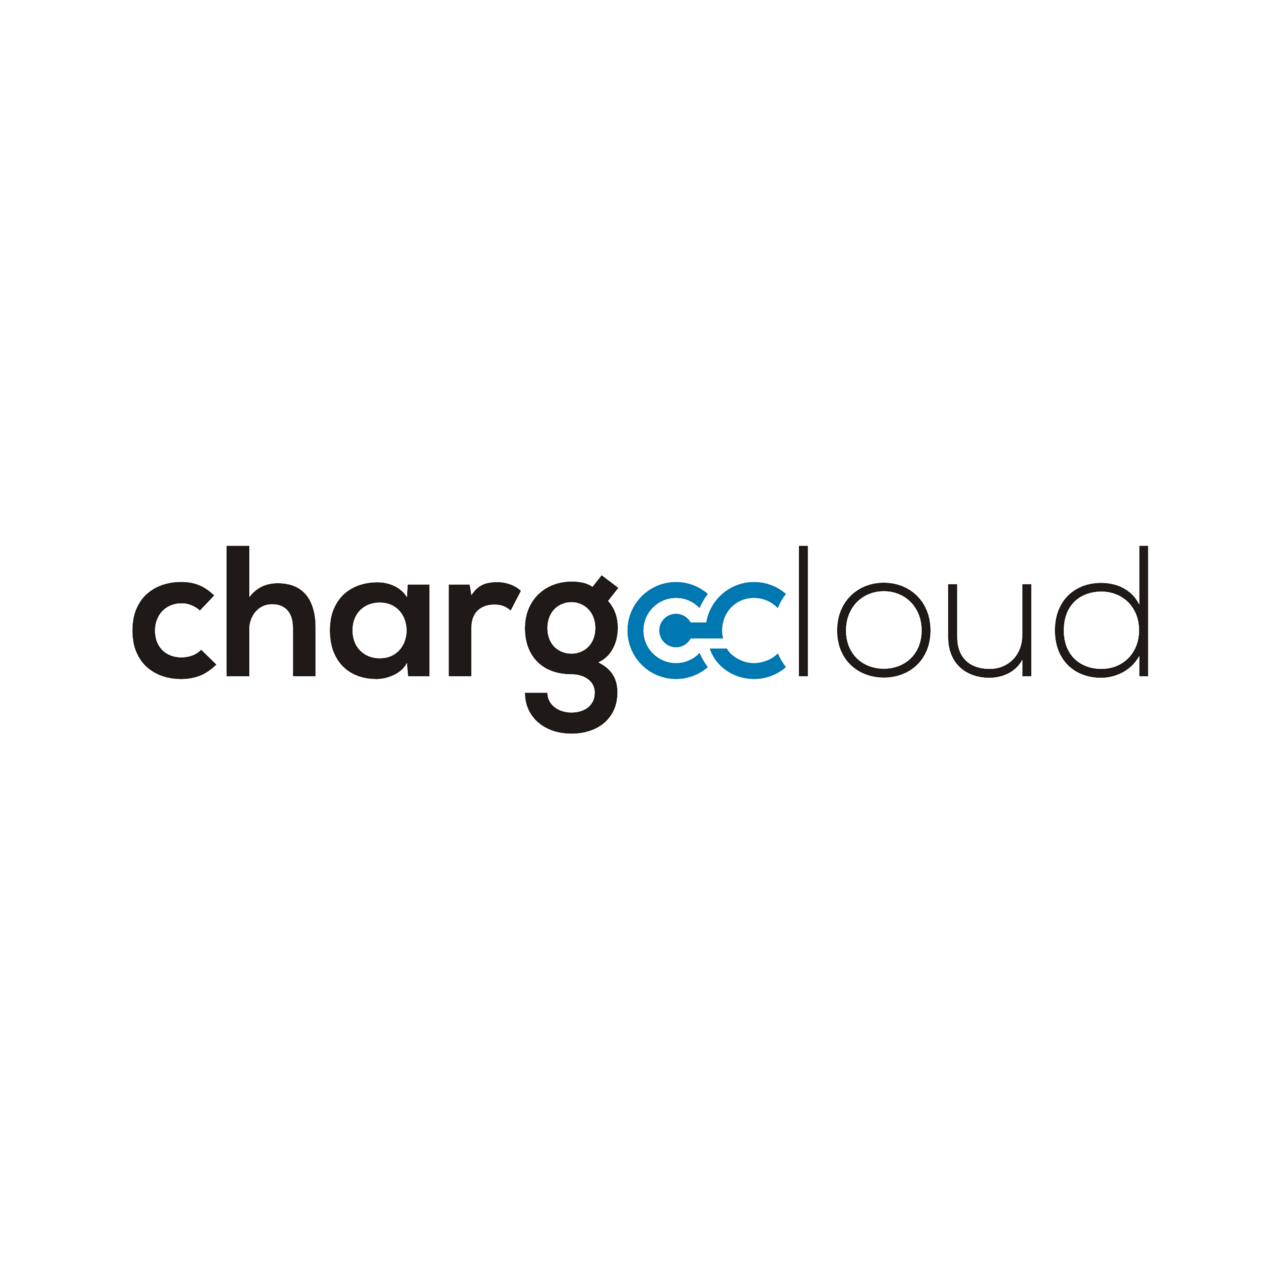 chargecloud becomes a core member of CharIN